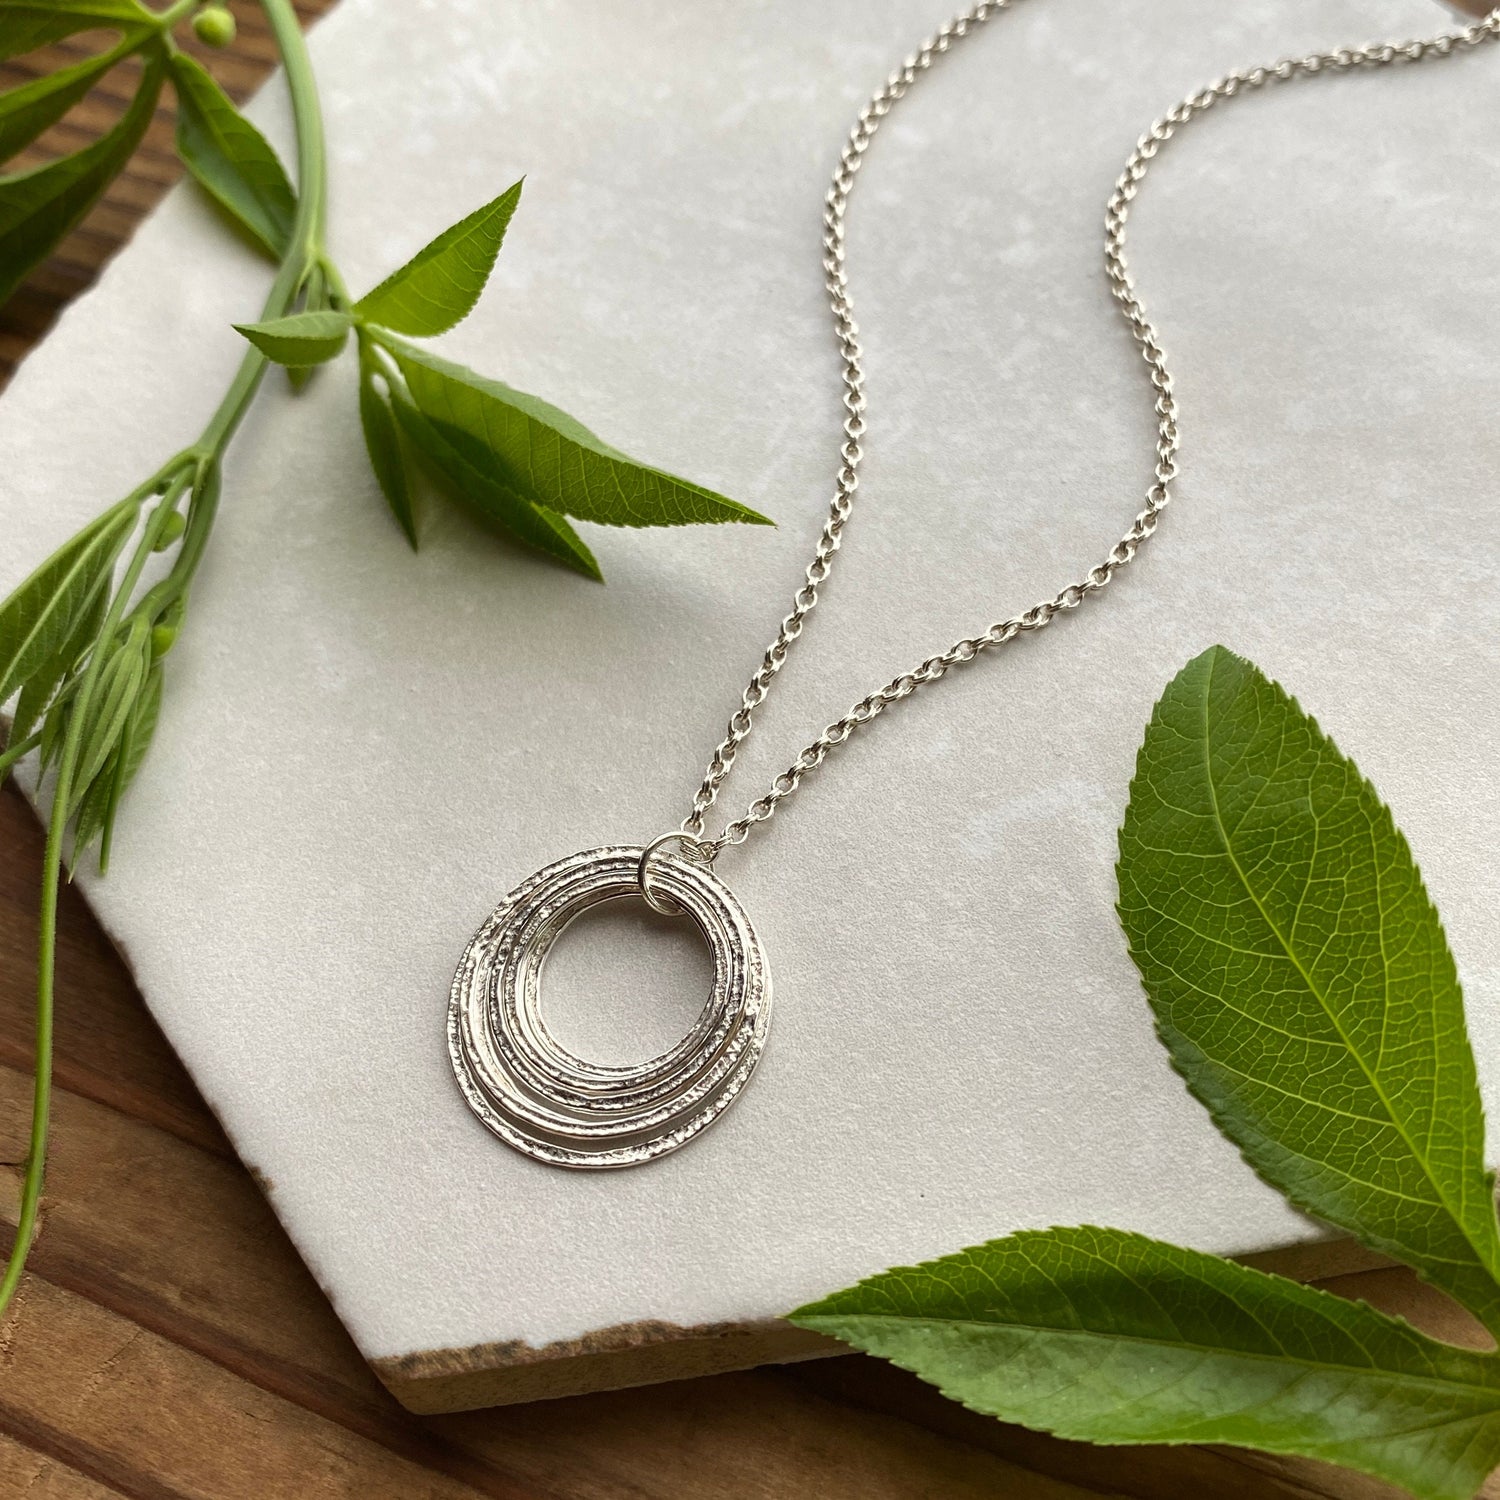 8 Circle 80th Minimalist Milestone Birthday Necklace, Sterling Silver 8 Rings Eight Decades Handcrafted Perfectly Imperfect Circle Pendant